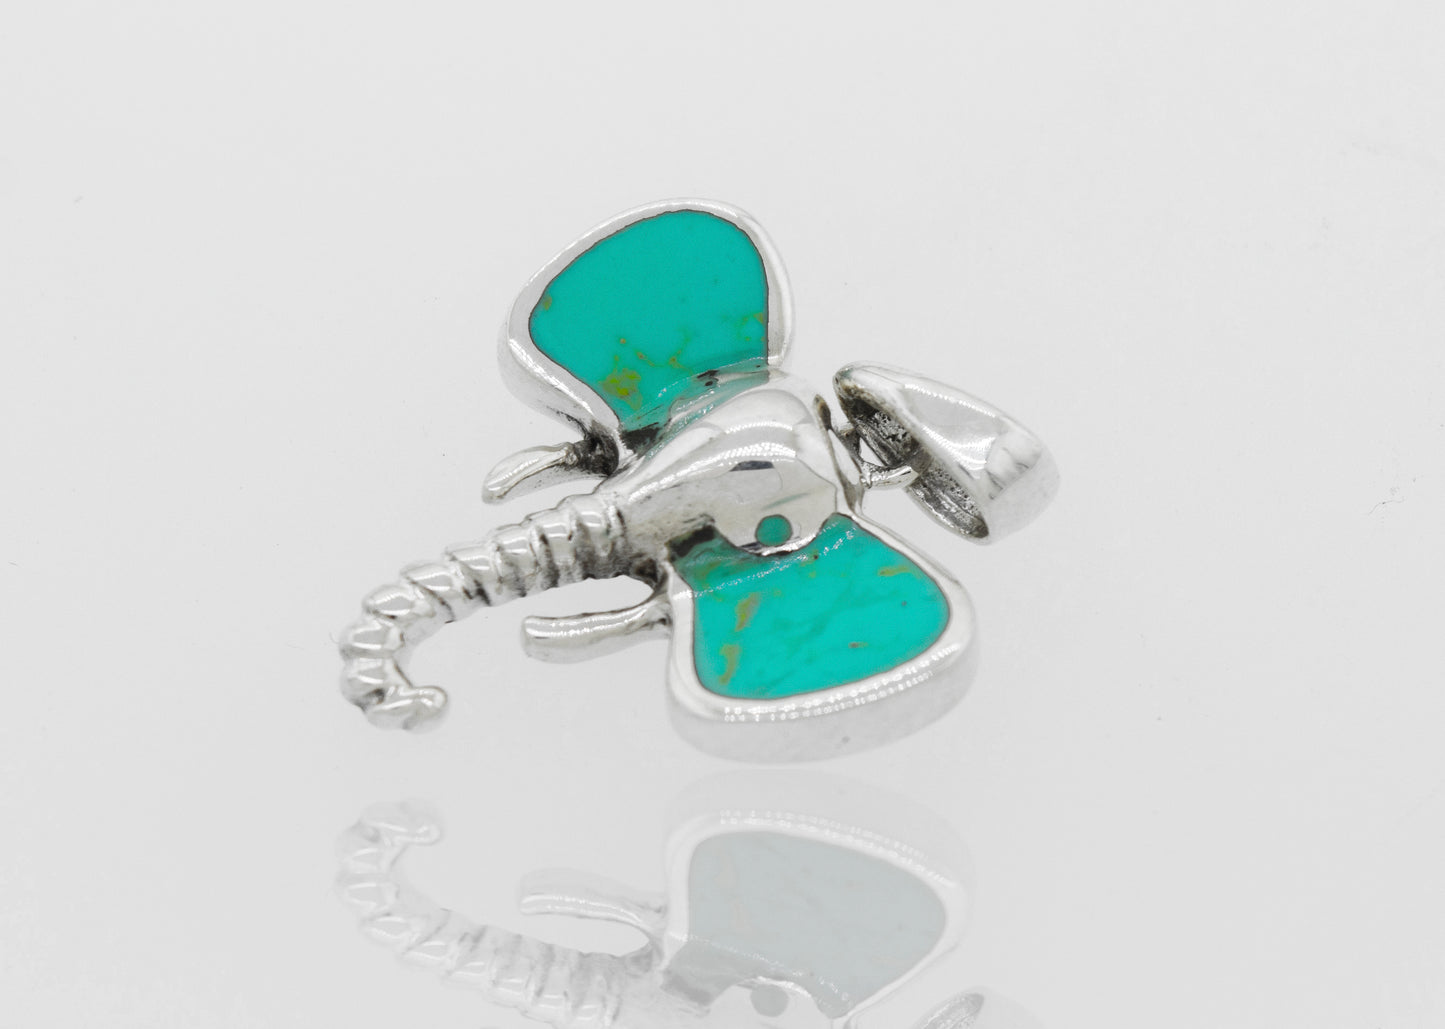 A Super Silver Elephant Head Pendant With Stone with inlaid stone ears and a turquoise stone.